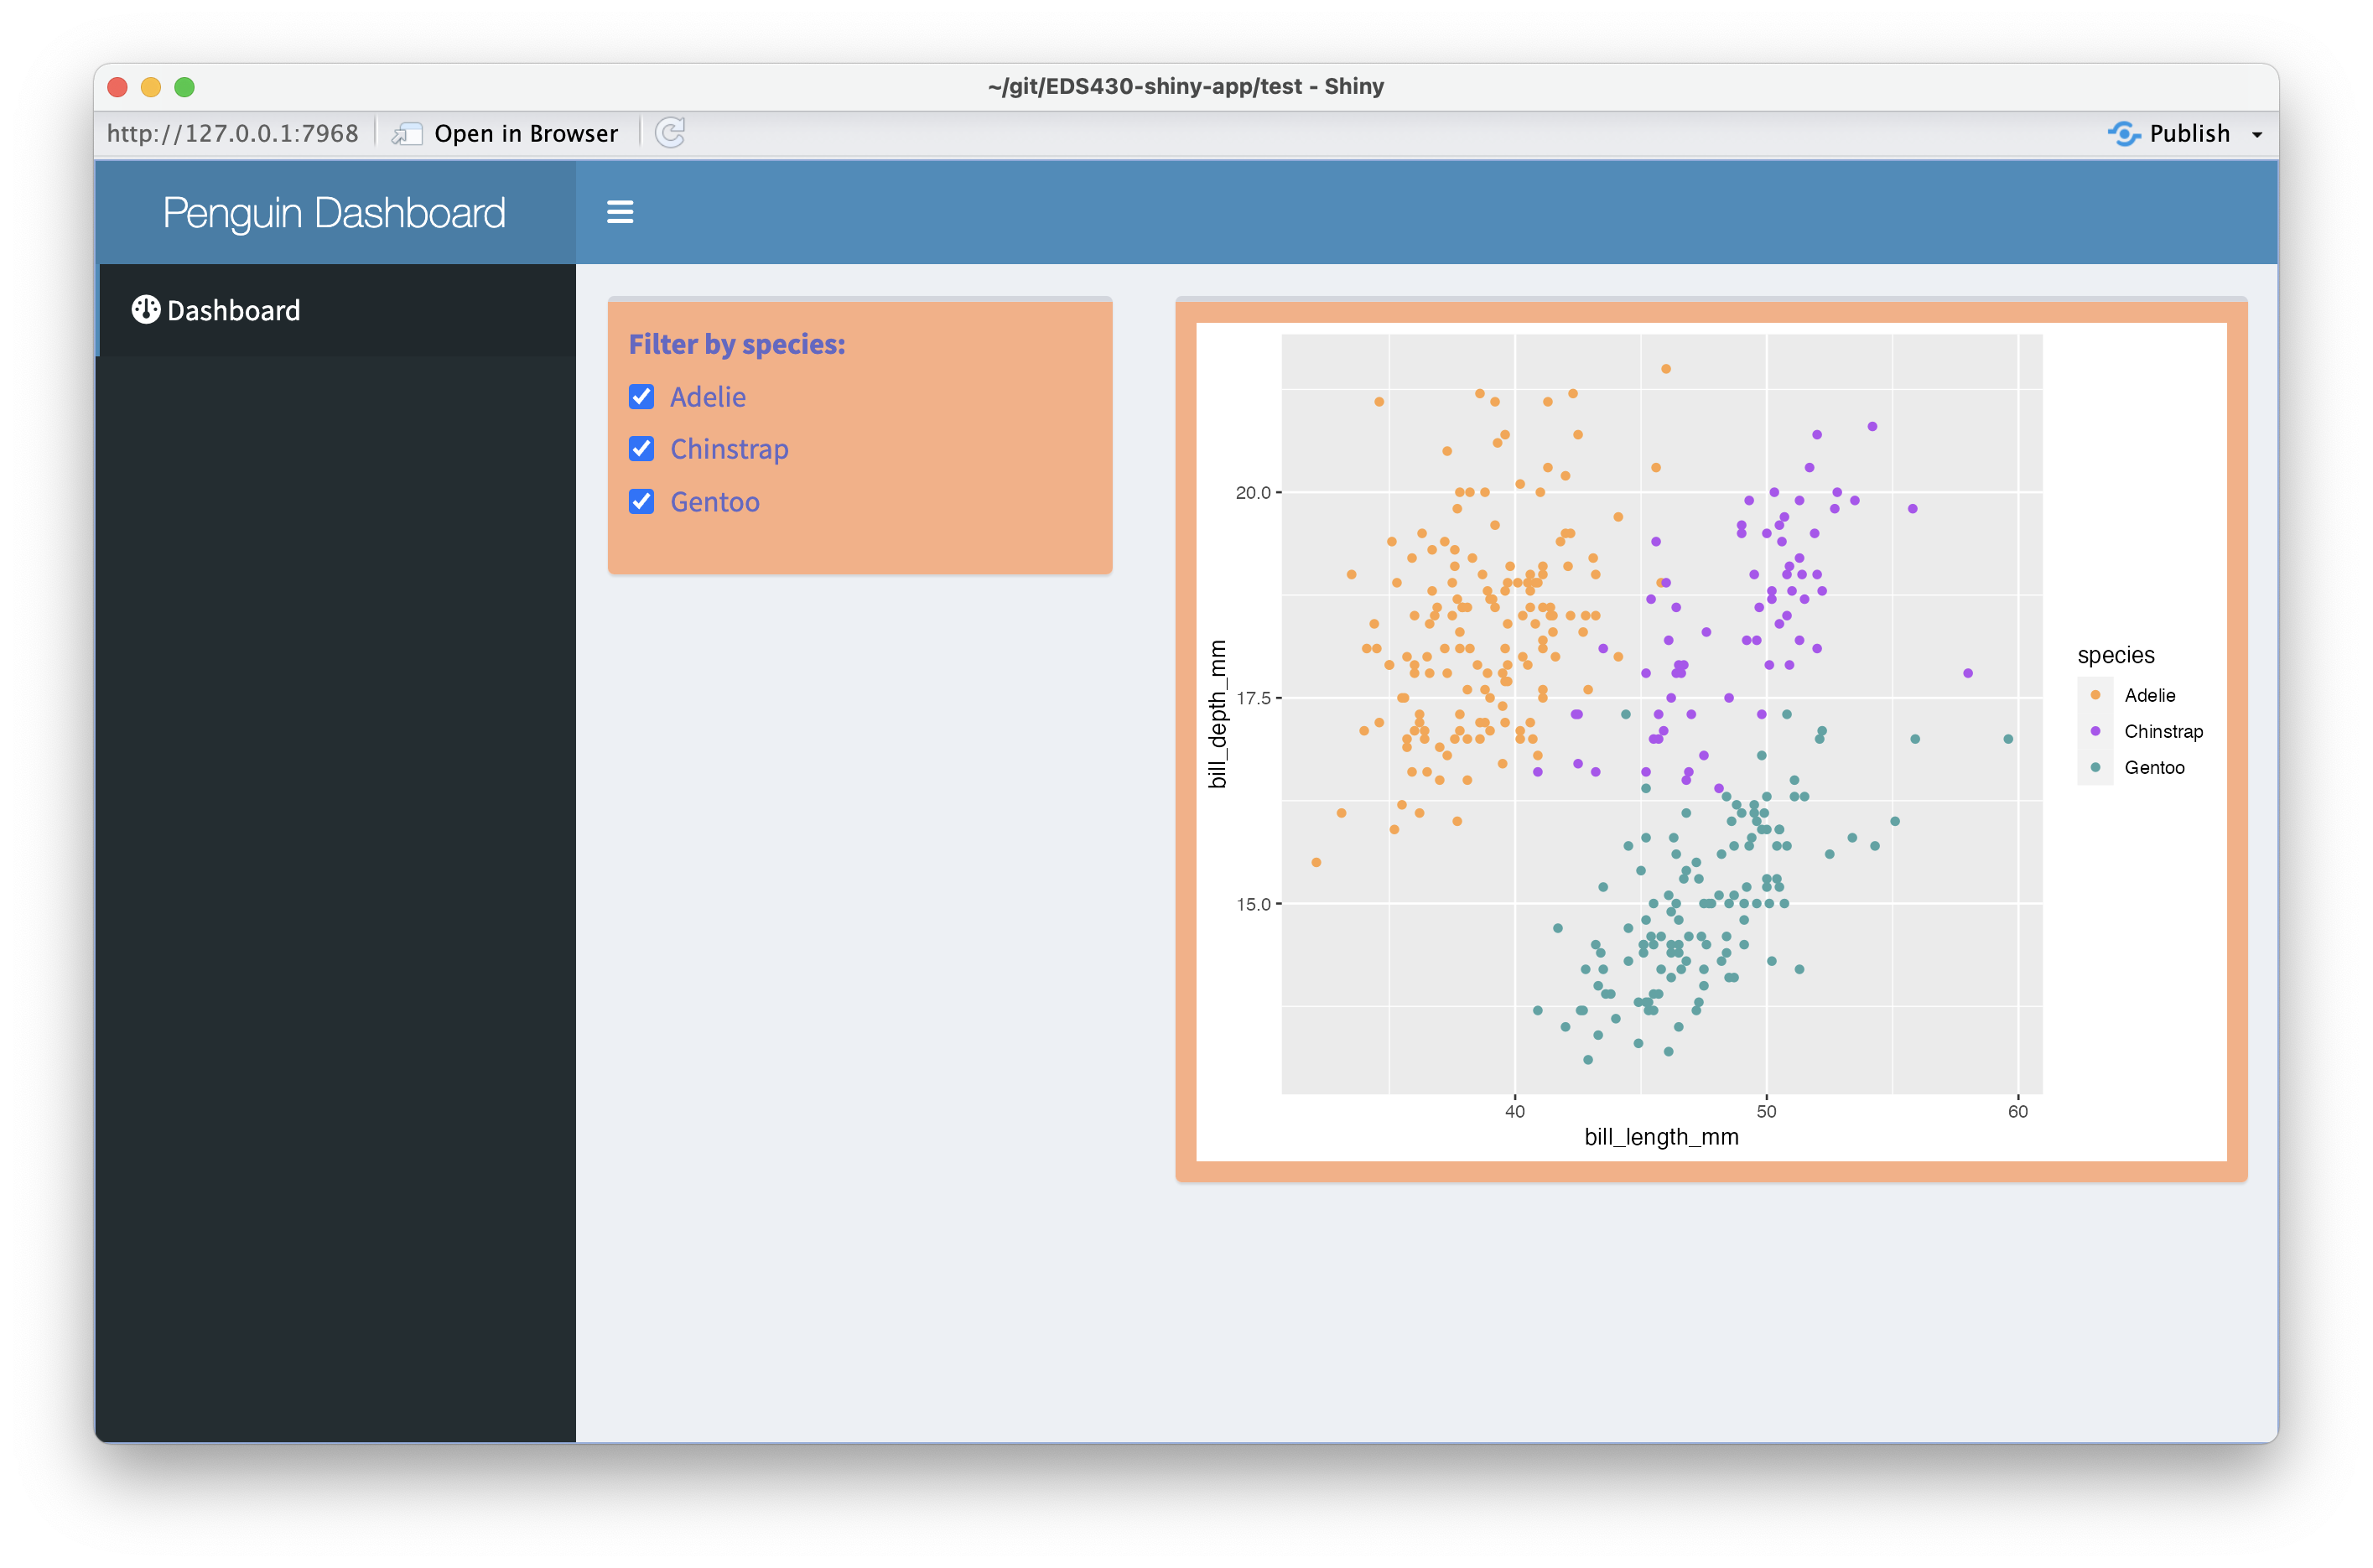 An example shinydashboard with default colors (light blue dashboardHeader, dark blue dashboardSidebar, gray/blue dashboardBody) and two boxes, one containing a checkboxGroupInput and the other containing a scatterplot -- the box colors are colored orange, rather than the default white.